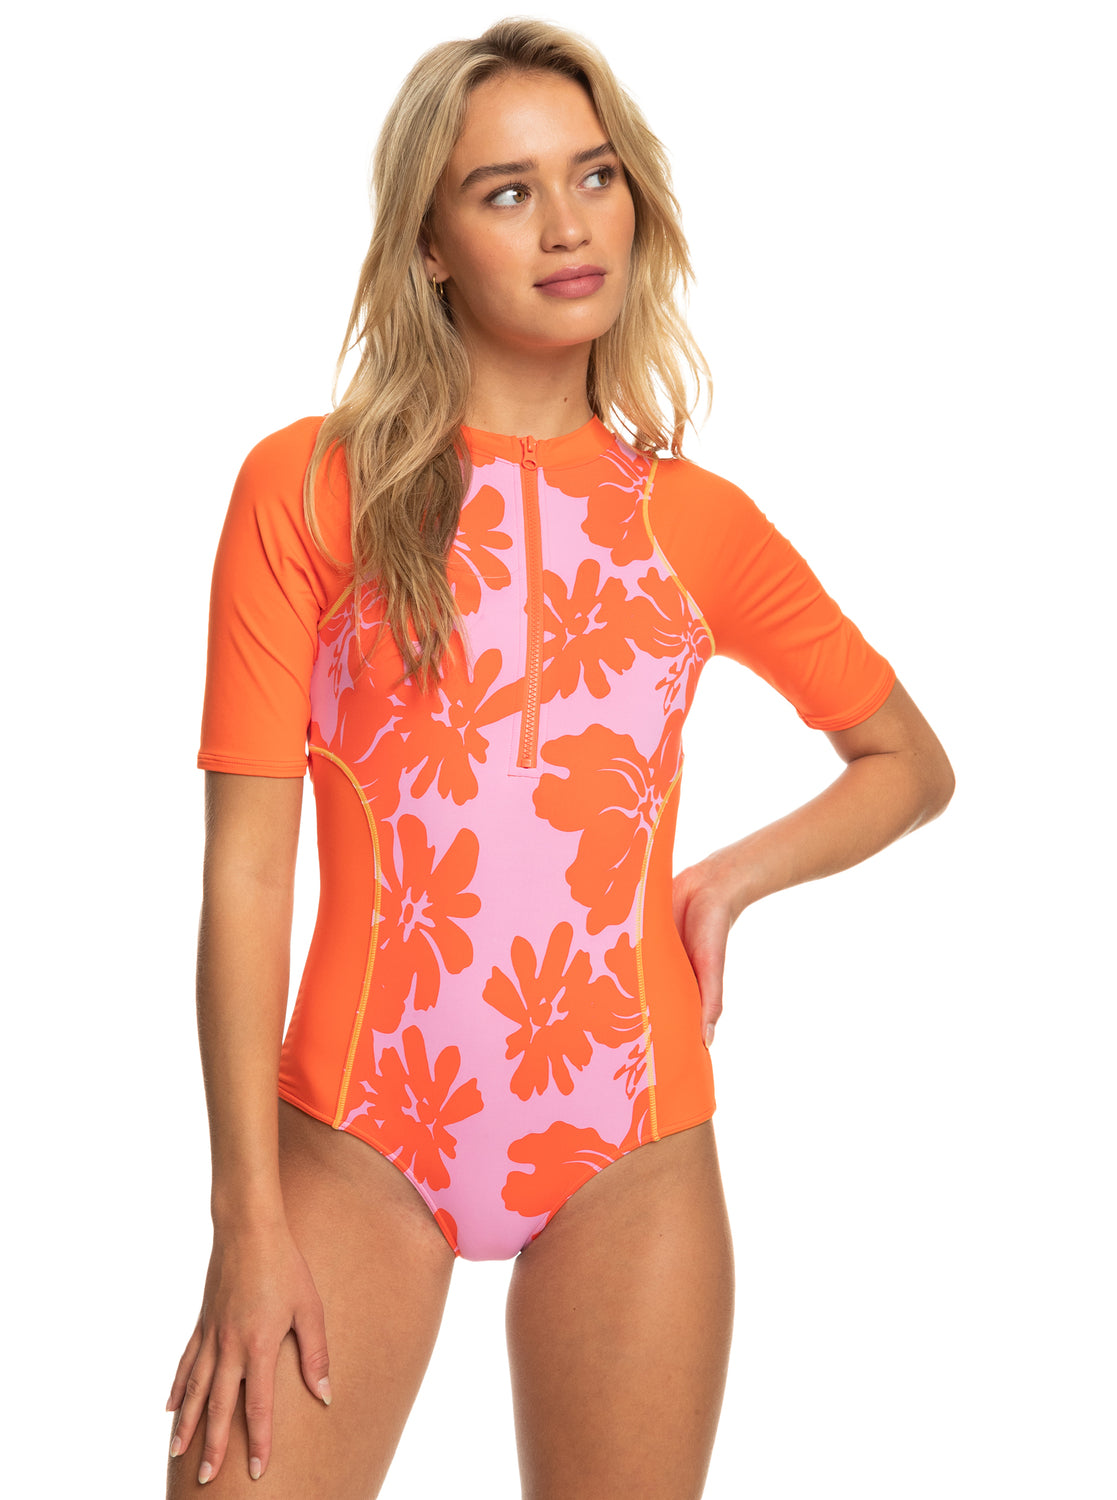 Roxy Surf.Kind.Kate 3/4 SS Onsie XMNM L